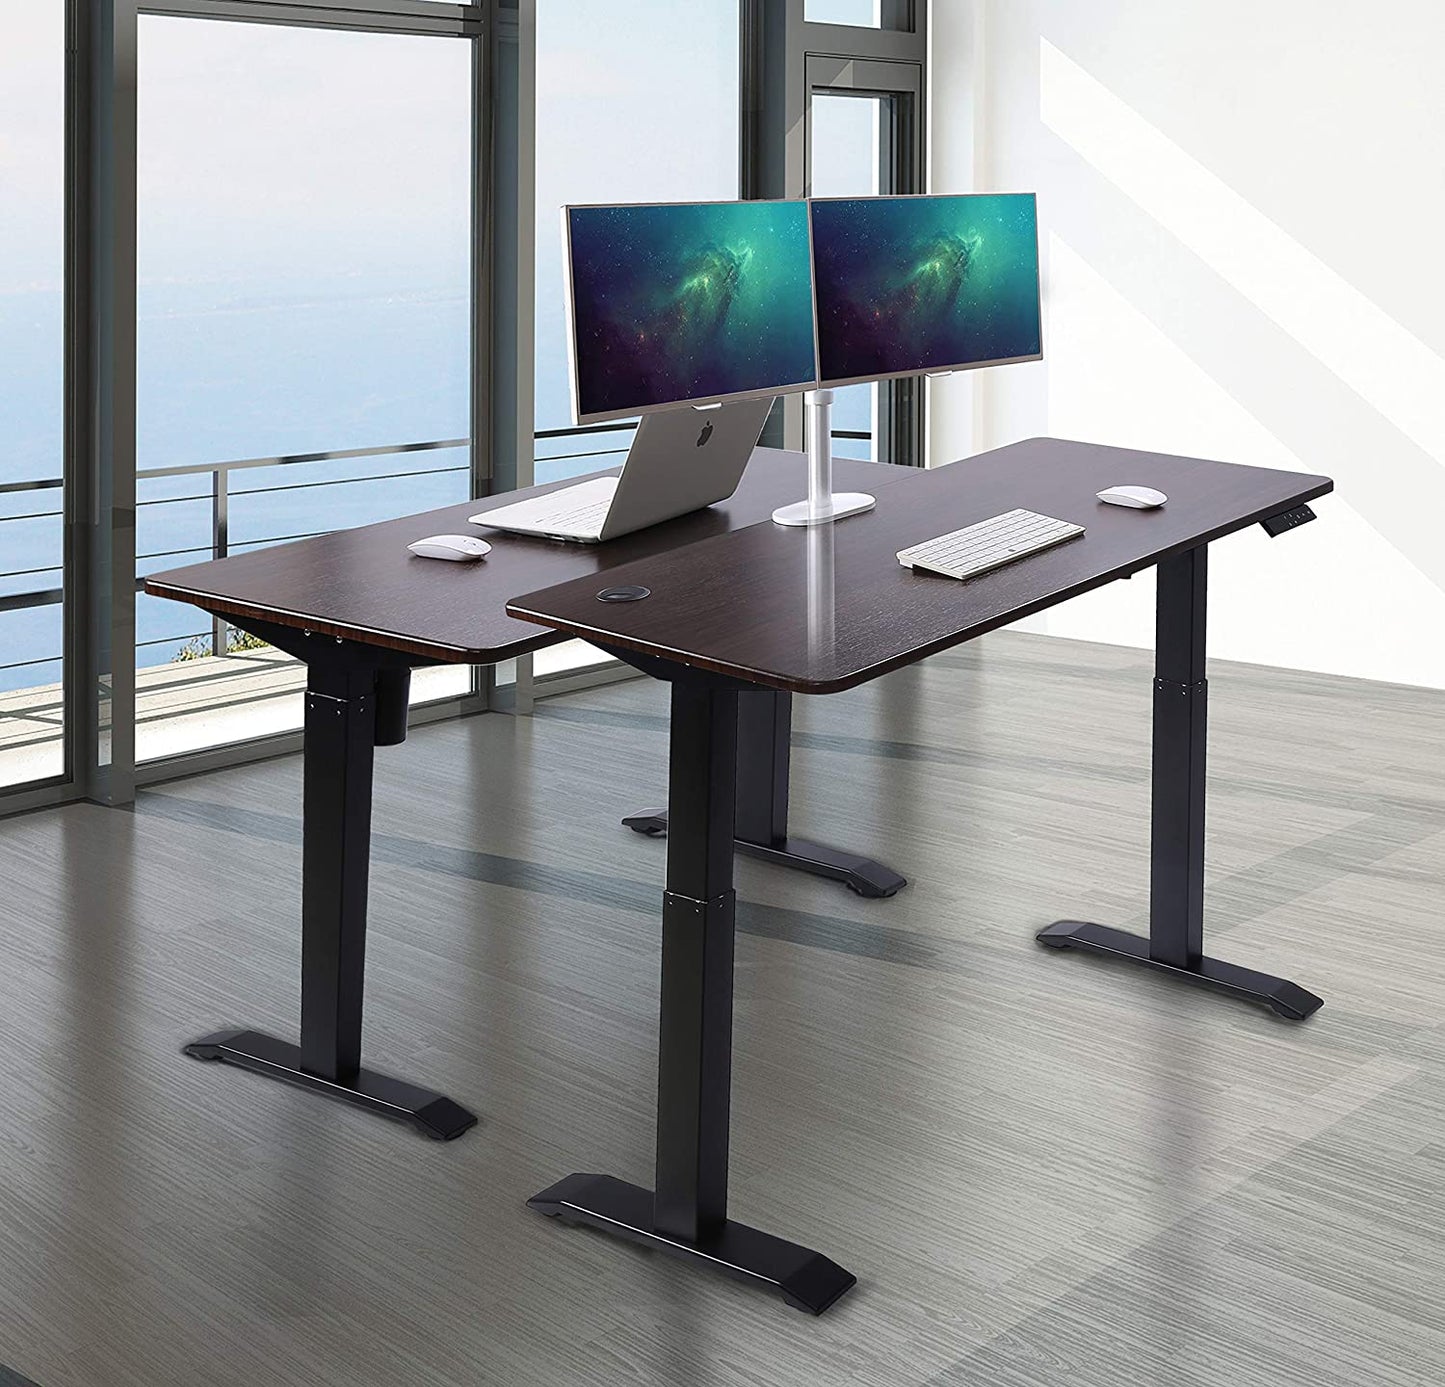 UNICOO - Electric Height Adjustable Standing Desk, Electric Standing Workstation Home Office Sit Stand Up Desk with 4 Pre-Set Memory Led Display Controller KT1001